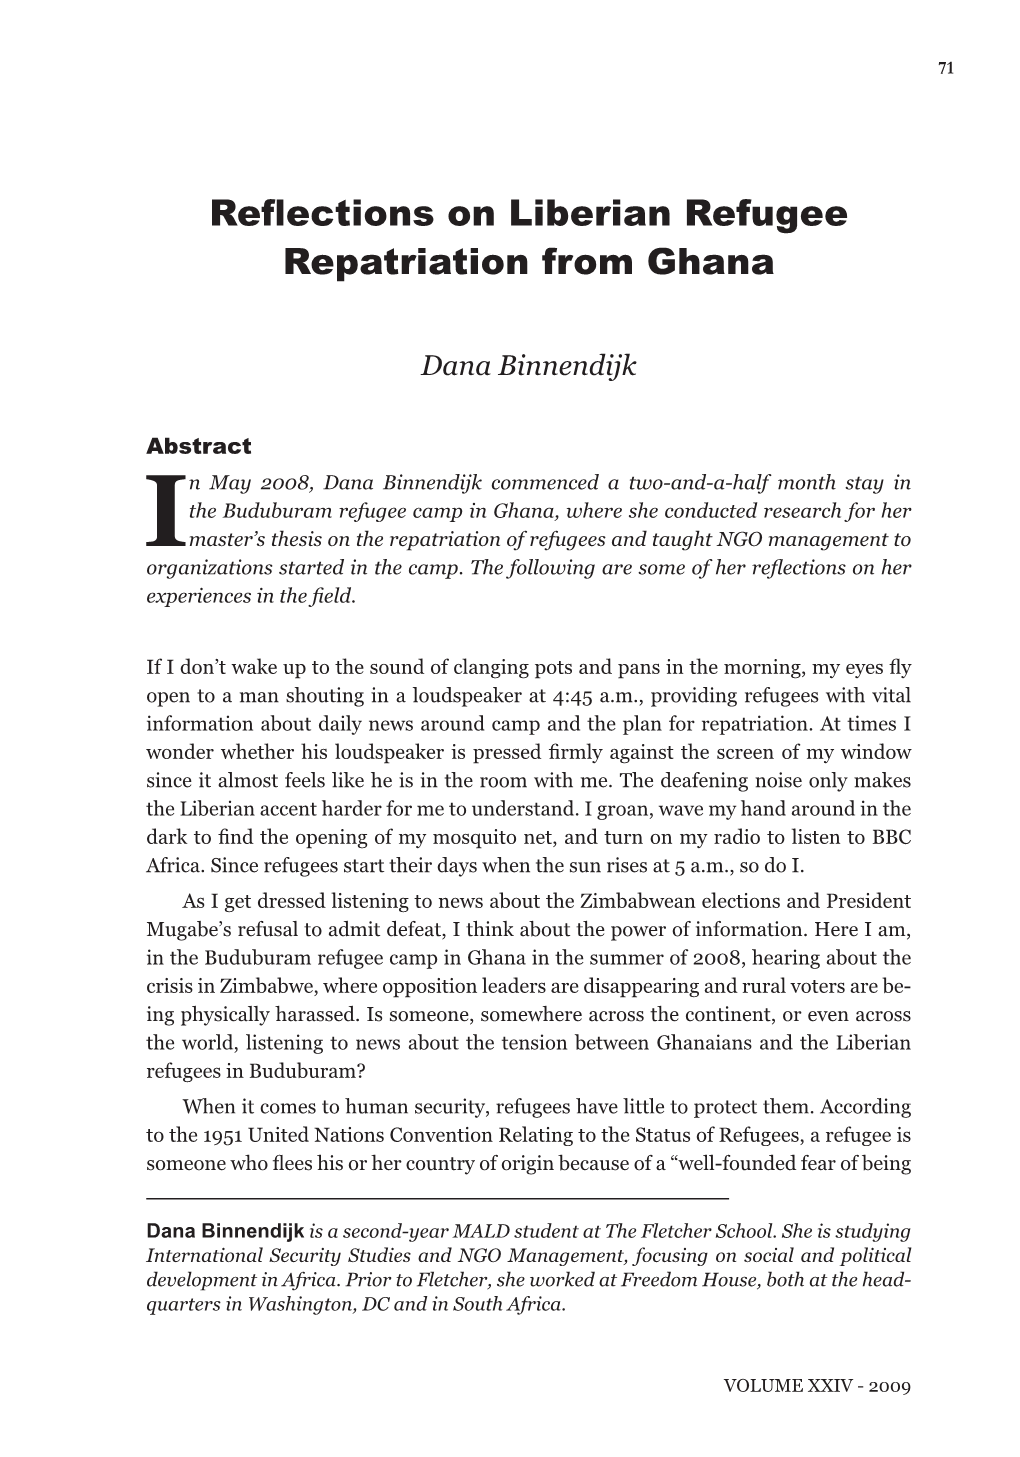 Reflections on Liberian Refugee Repatriation from Ghana